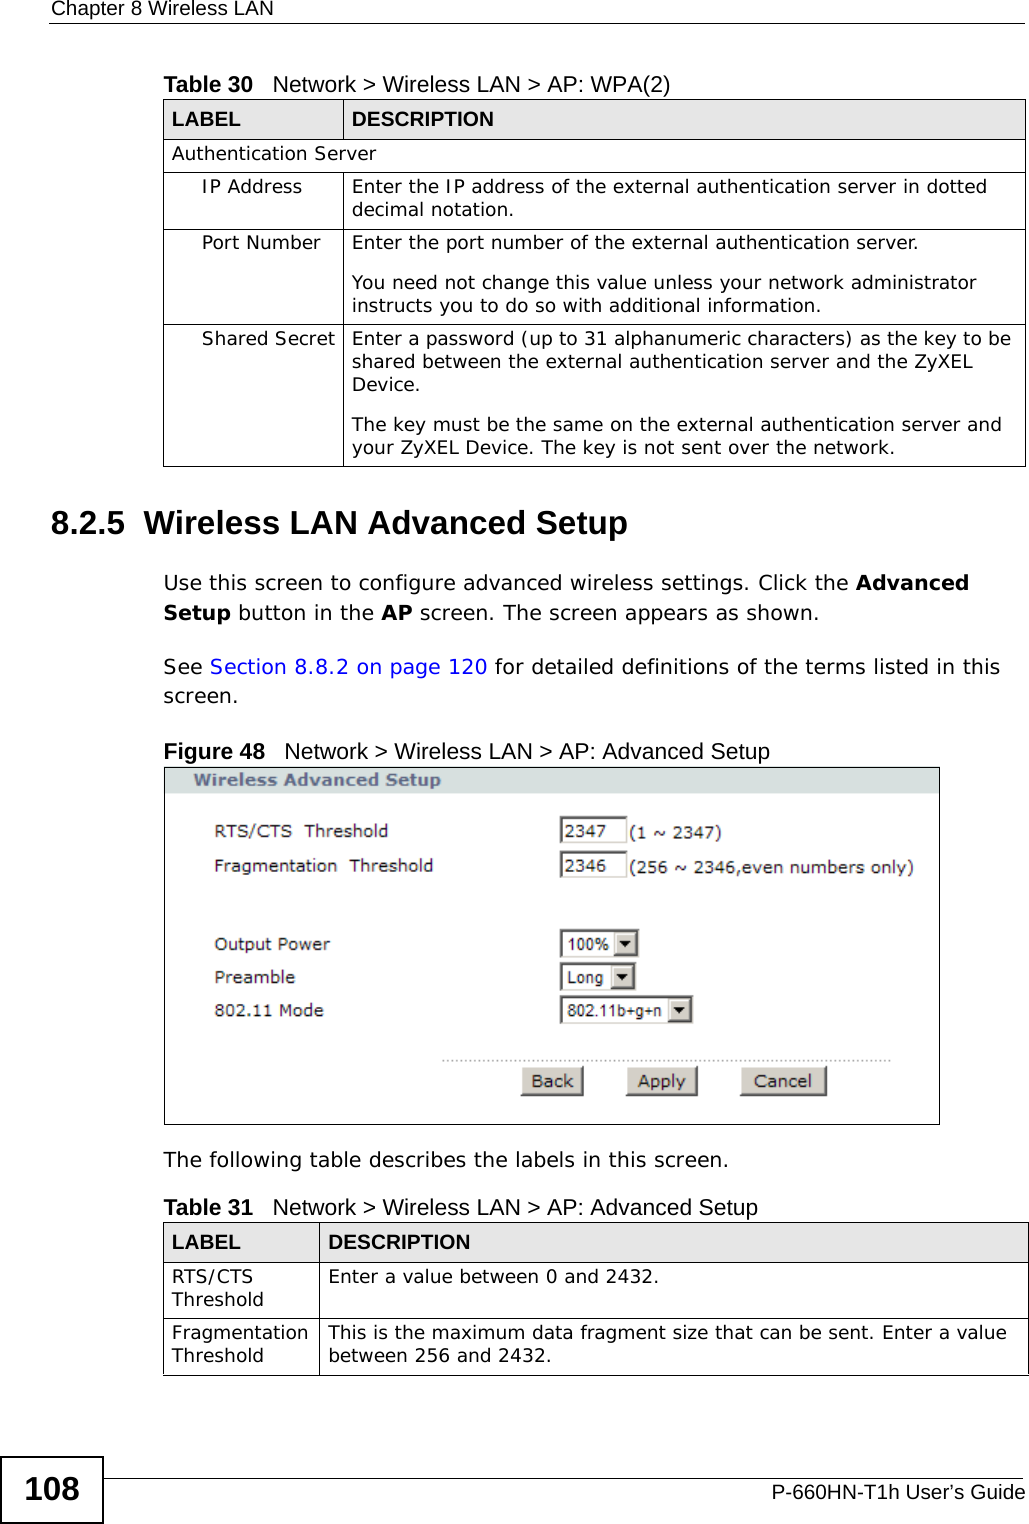 Chapter 8 Wireless LANP-660HN-T1h User’s Guide1088.2.5  Wireless LAN Advanced SetupUse this screen to configure advanced wireless settings. Click the Advanced Setup button in the AP screen. The screen appears as shown.See Section 8.8.2 on page 120 for detailed definitions of the terms listed in this screen.Figure 48   Network &gt; Wireless LAN &gt; AP: Advanced SetupThe following table describes the labels in this screen. Authentication ServerIP Address Enter the IP address of the external authentication server in dotted decimal notation.Port Number Enter the port number of the external authentication server.You need not change this value unless your network administrator instructs you to do so with additional information. Shared Secret Enter a password (up to 31 alphanumeric characters) as the key to be shared between the external authentication server and the ZyXEL Device.The key must be the same on the external authentication server and your ZyXEL Device. The key is not sent over the network. Table 30   Network &gt; Wireless LAN &gt; AP: WPA(2)LABEL DESCRIPTIONTable 31   Network &gt; Wireless LAN &gt; AP: Advanced SetupLABEL DESCRIPTIONRTS/CTS Threshold Enter a value between 0 and 2432. Fragmentation Threshold This is the maximum data fragment size that can be sent. Enter a value between 256 and 2432. 